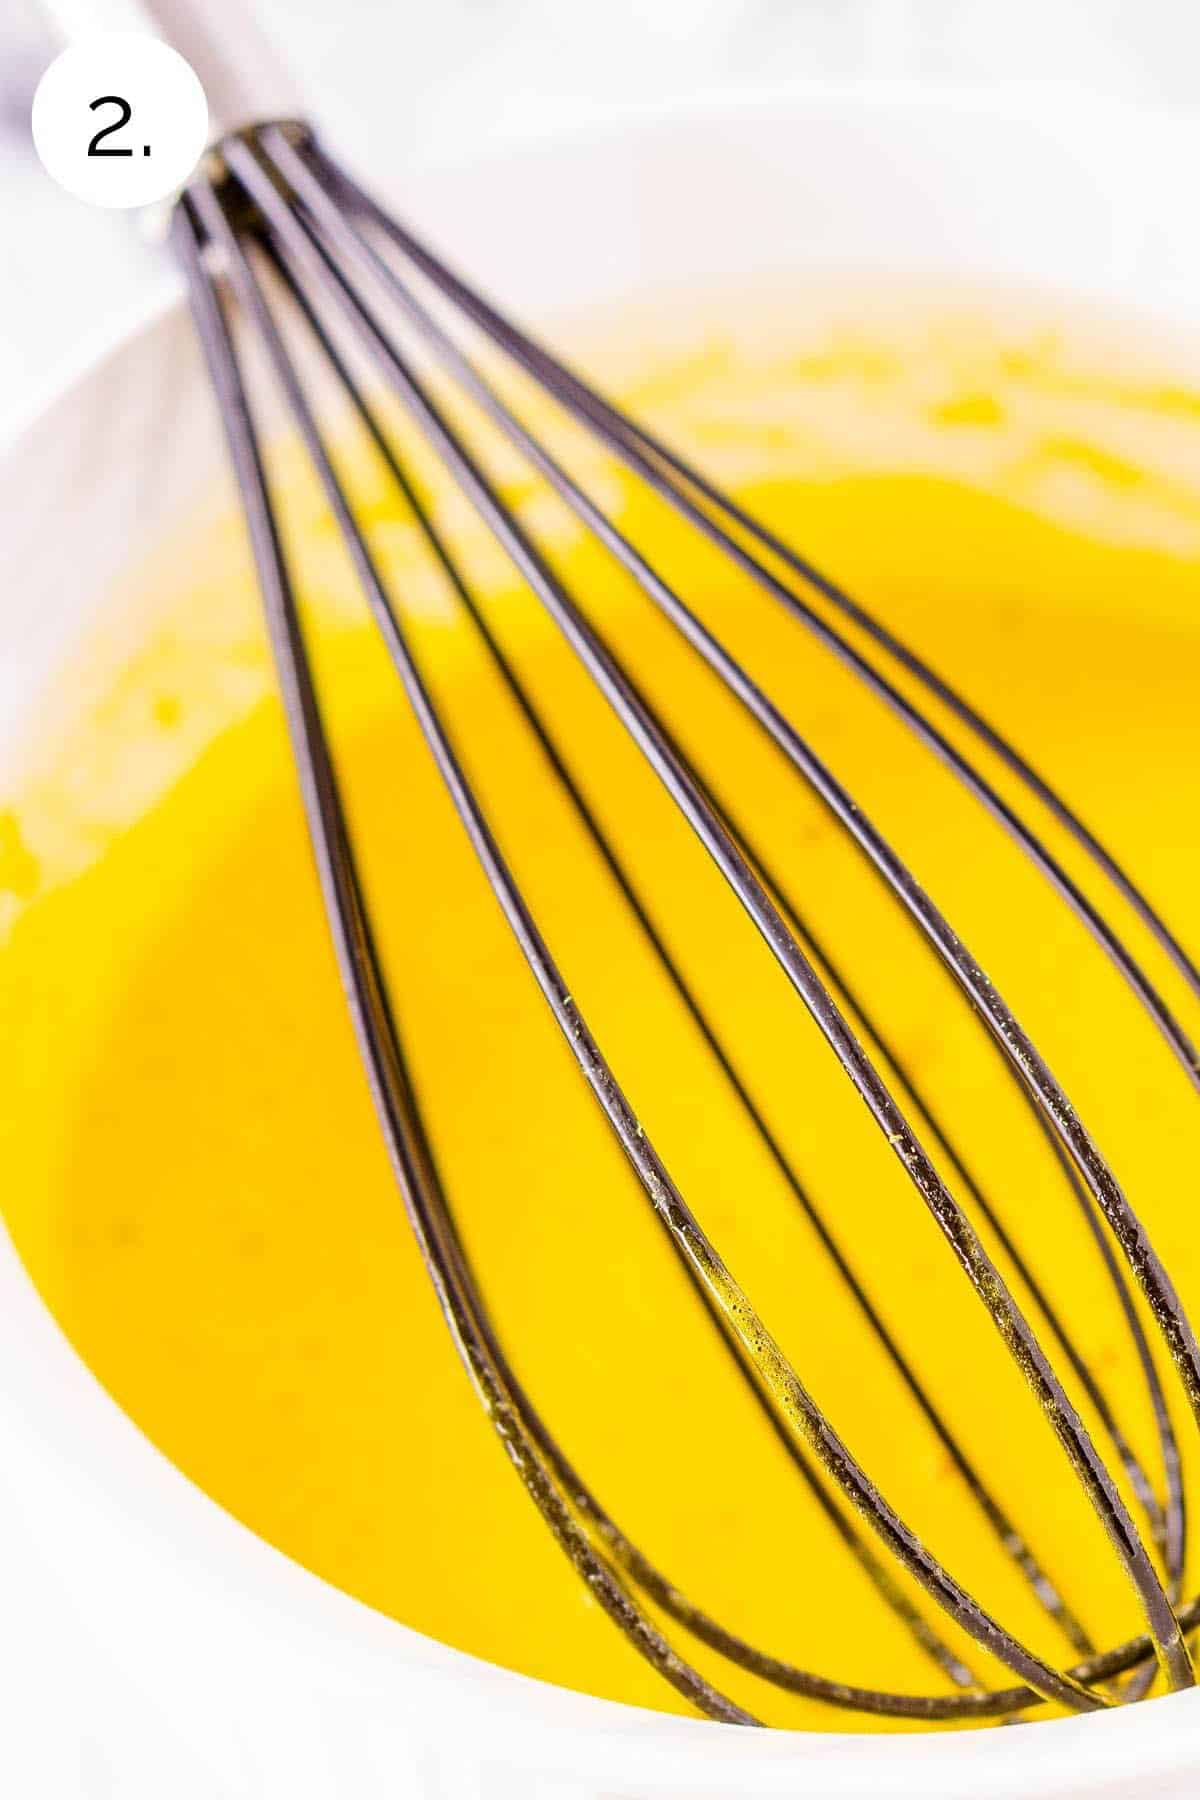 Whisking the egg yolks in a small white bowl against a white countertop.